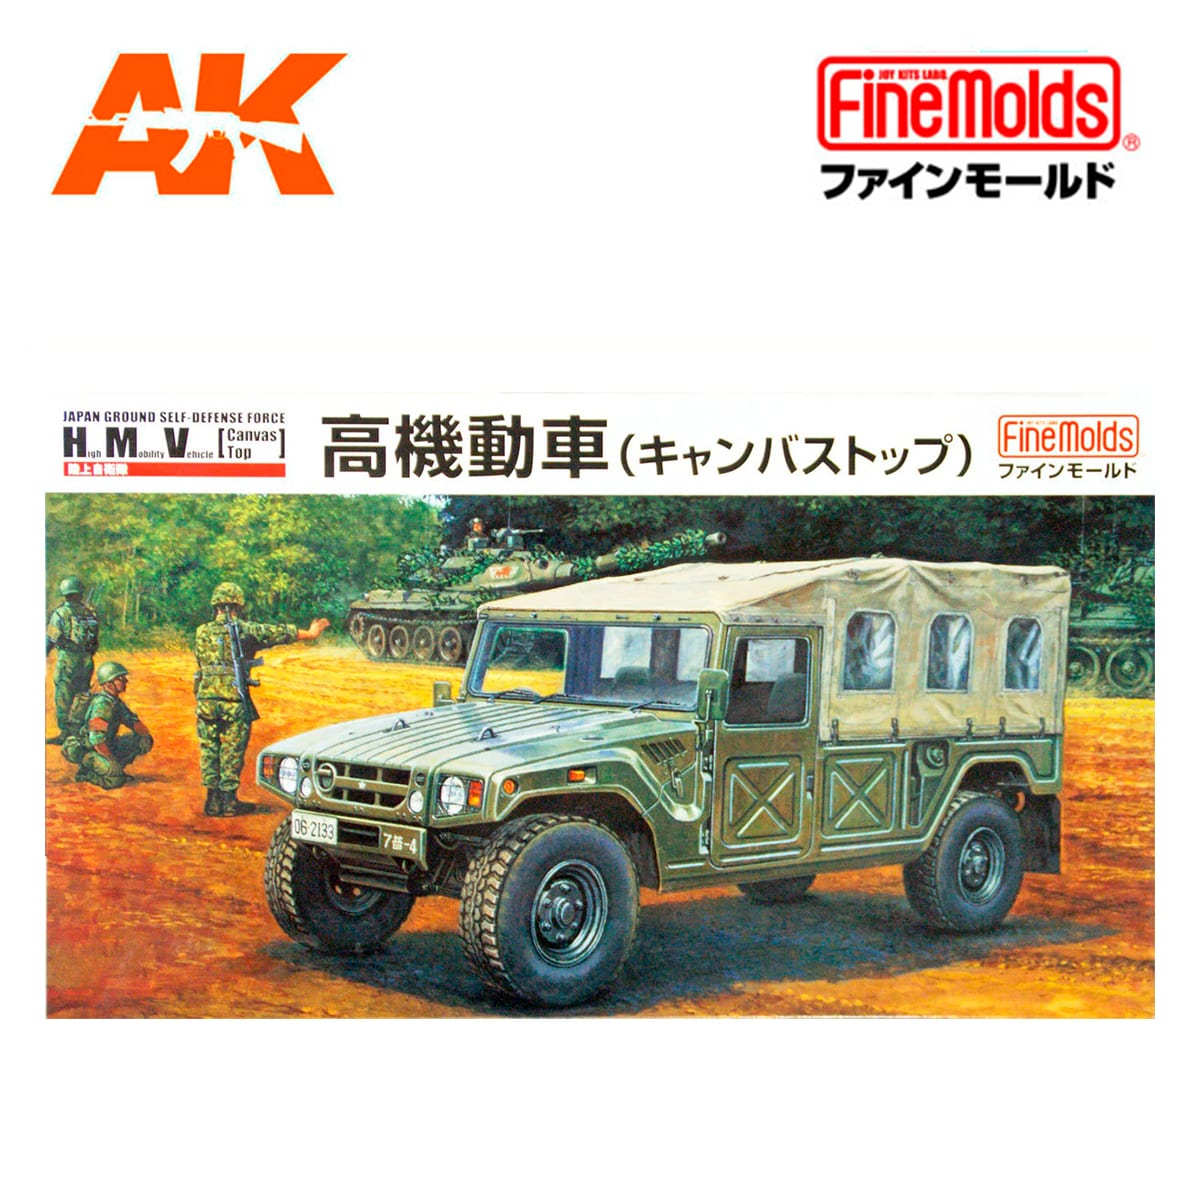 JGSDF High Mobility Vehicle w/ Canvas Top 1/35